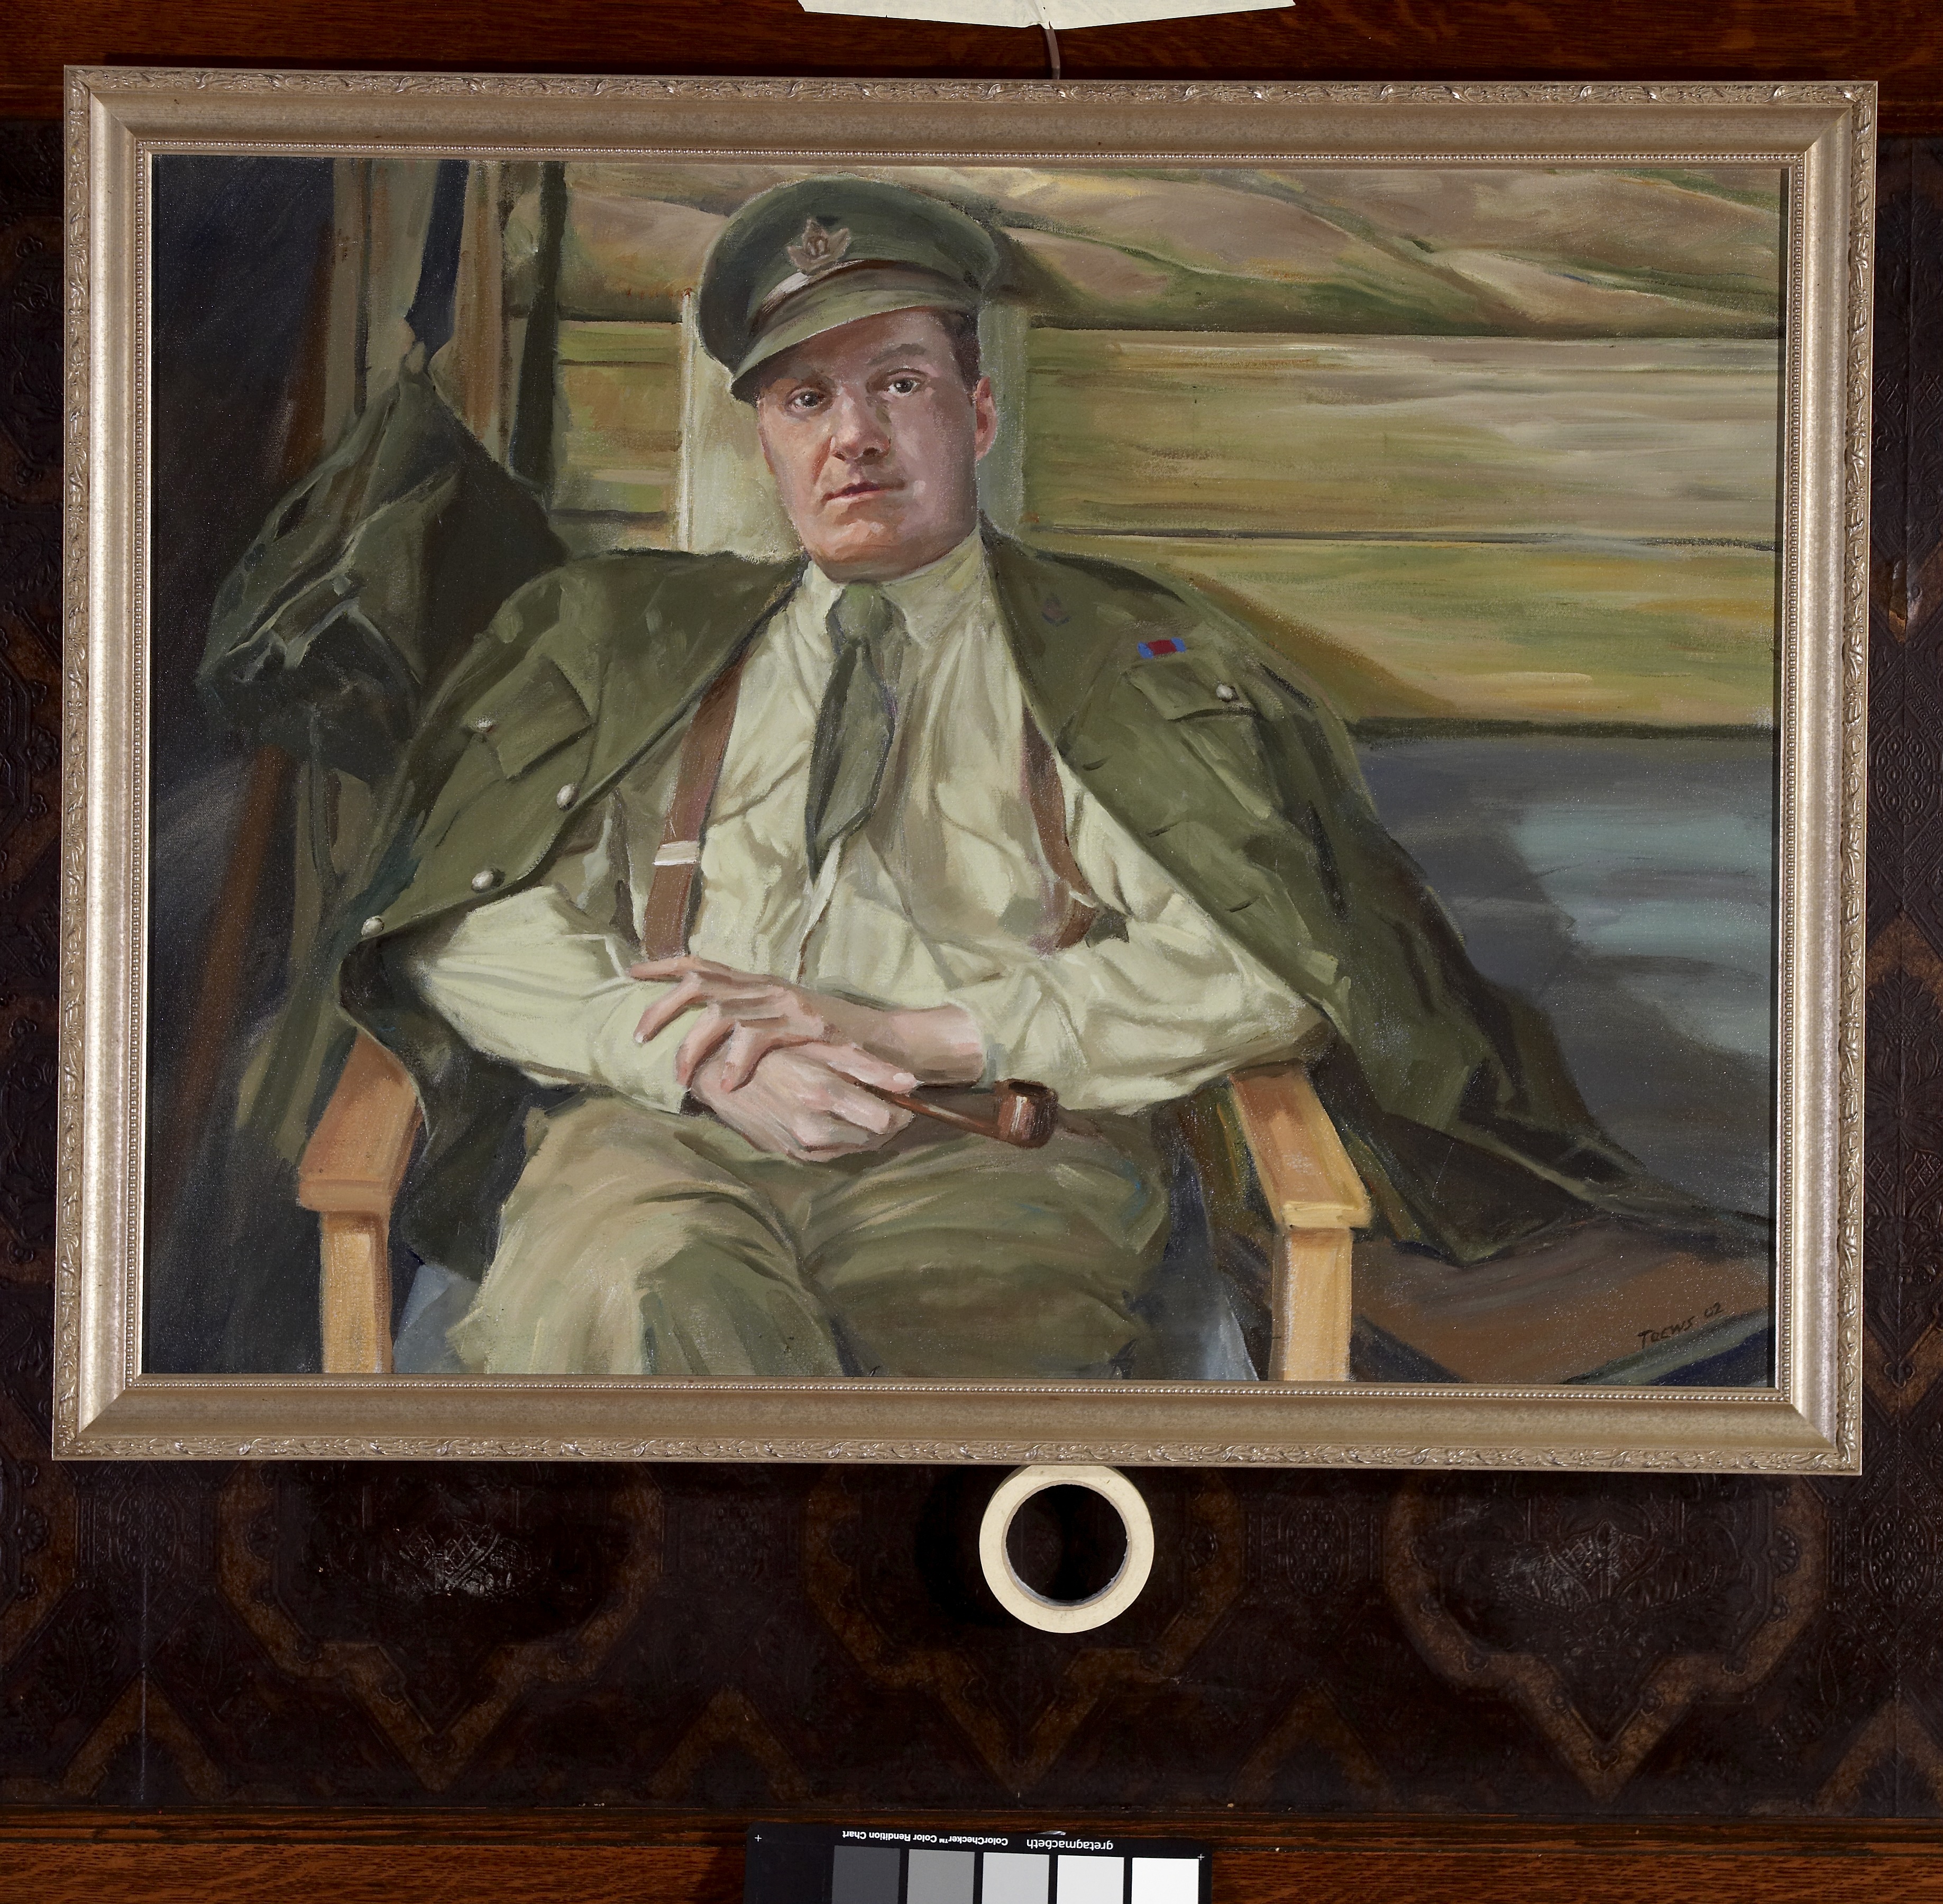 Lorne Toews, oil portrait of Lt-Col L.H. Millen, DSO, in the trenches, c. Feb. 1918.